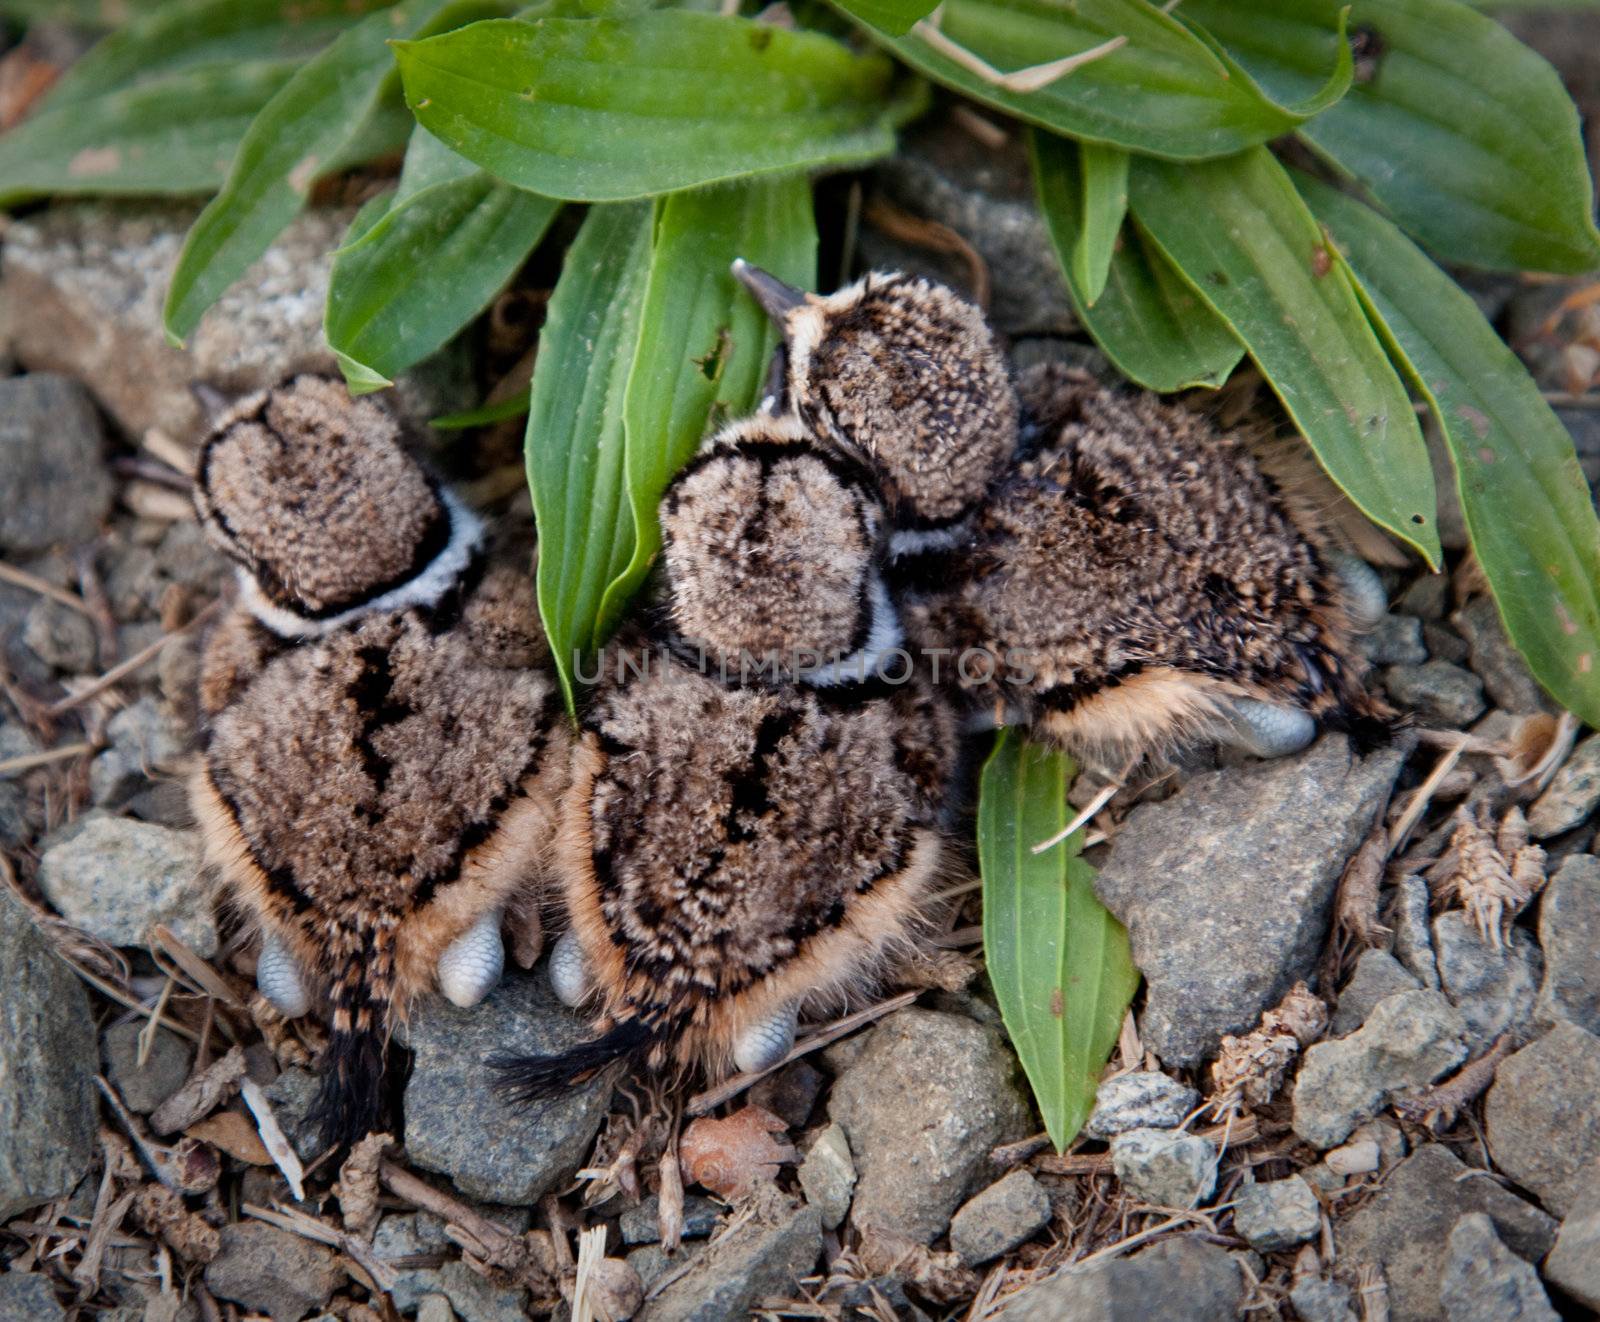 Killdeer chicks in nest about to get up and fly